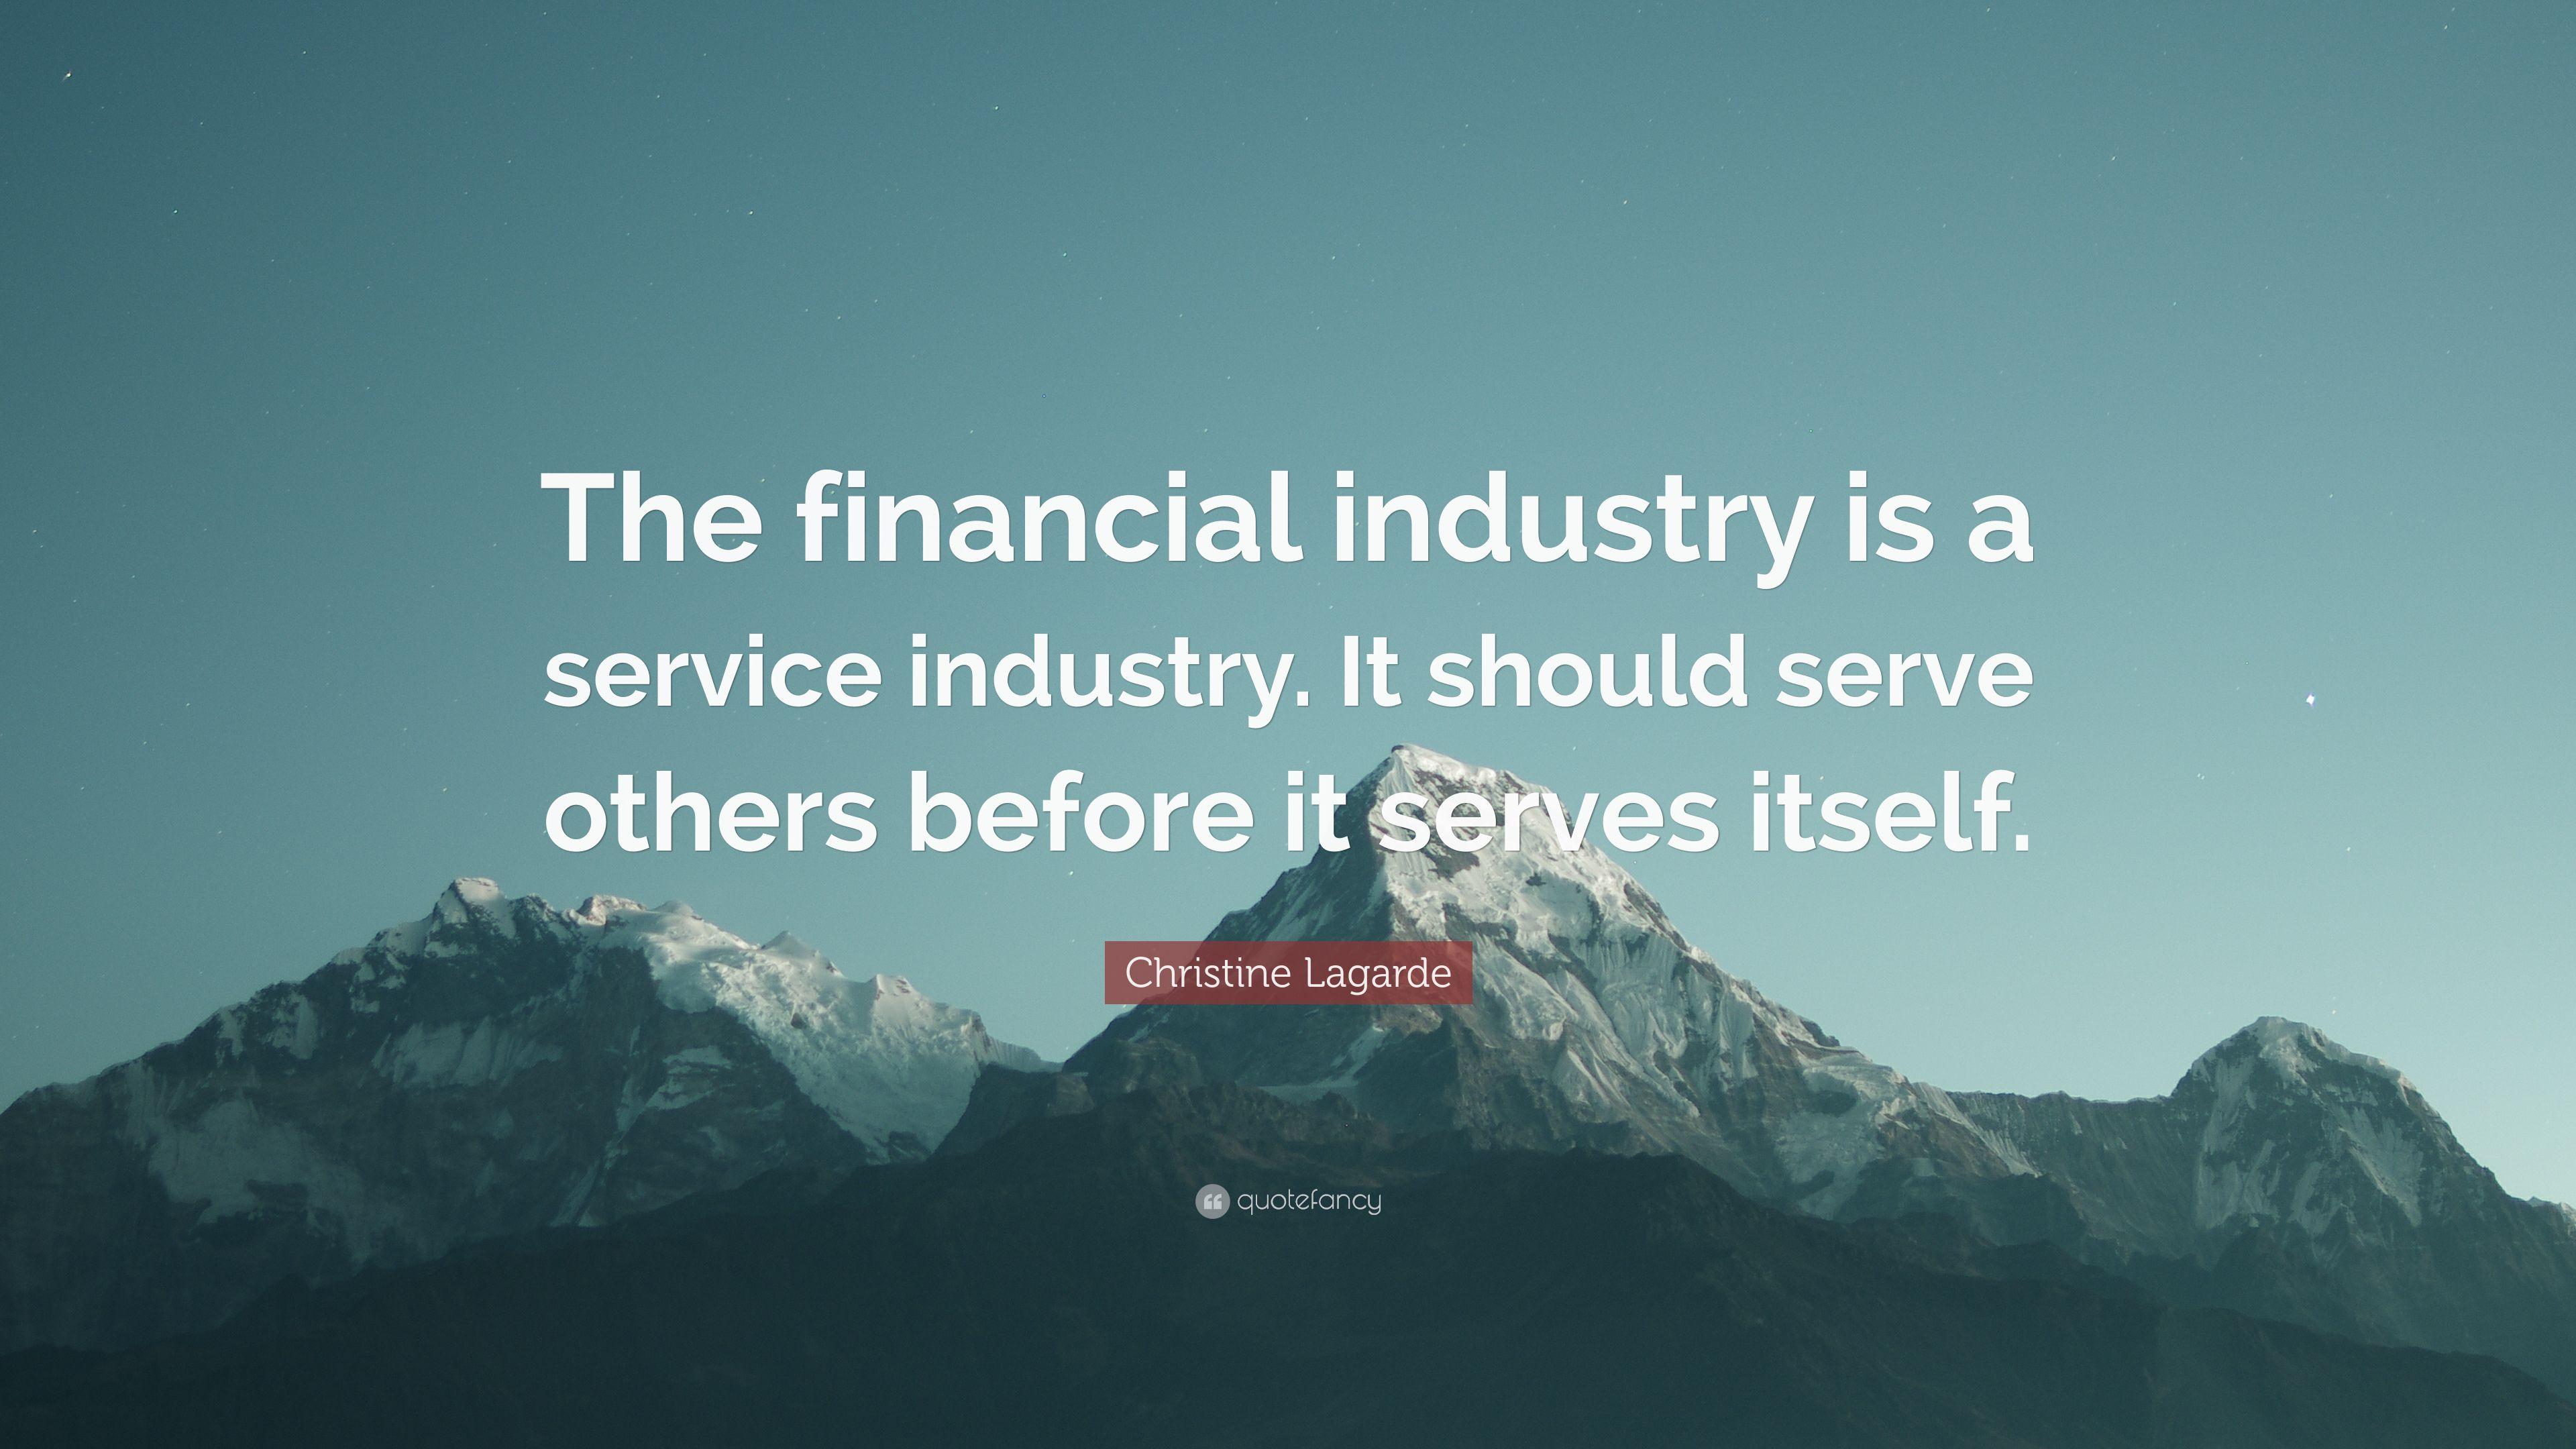 Christine Lagarde Quote: “The financial industry is a service